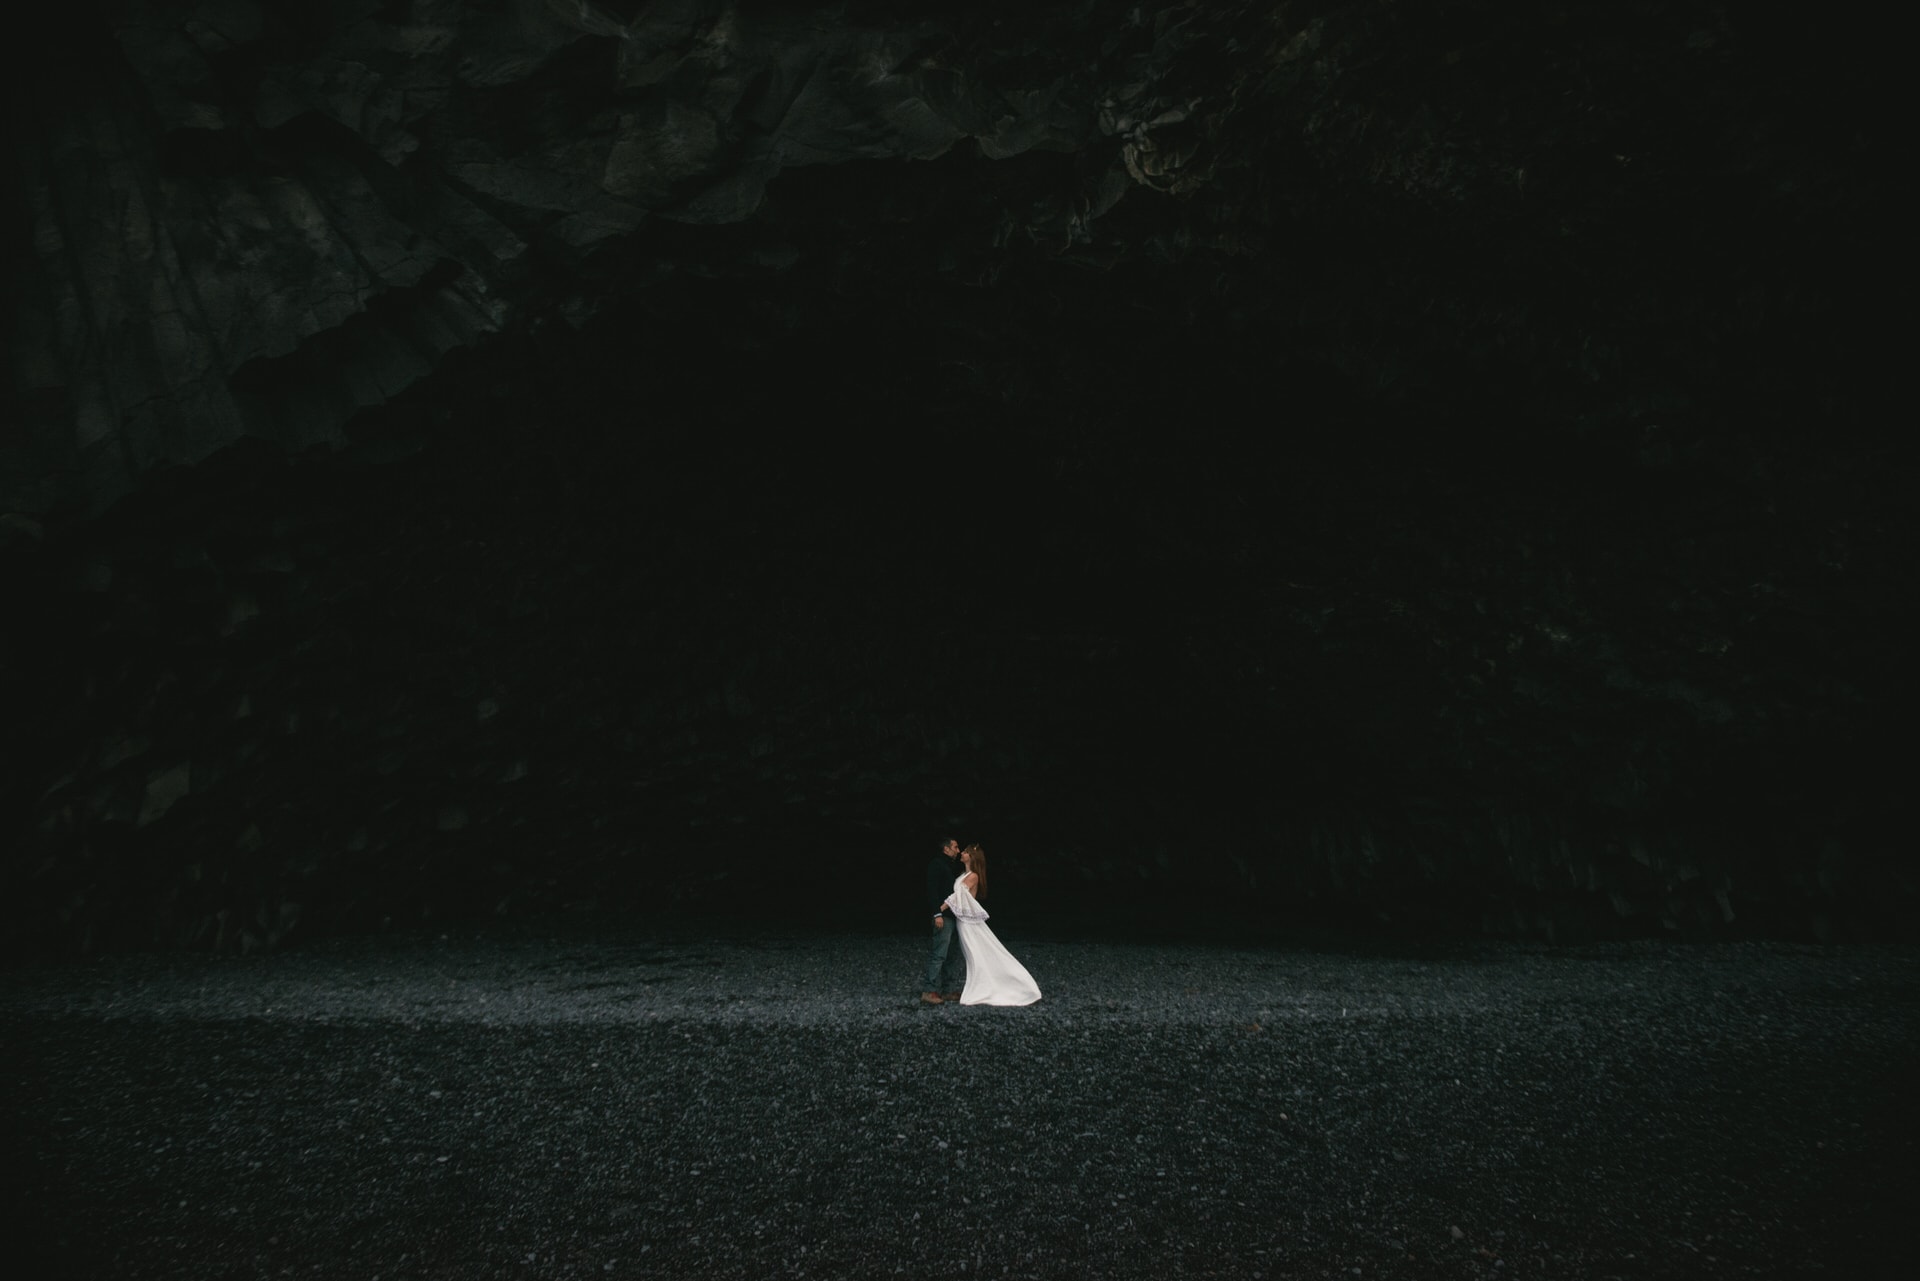 Post-wedding session on a black beach in Iceland